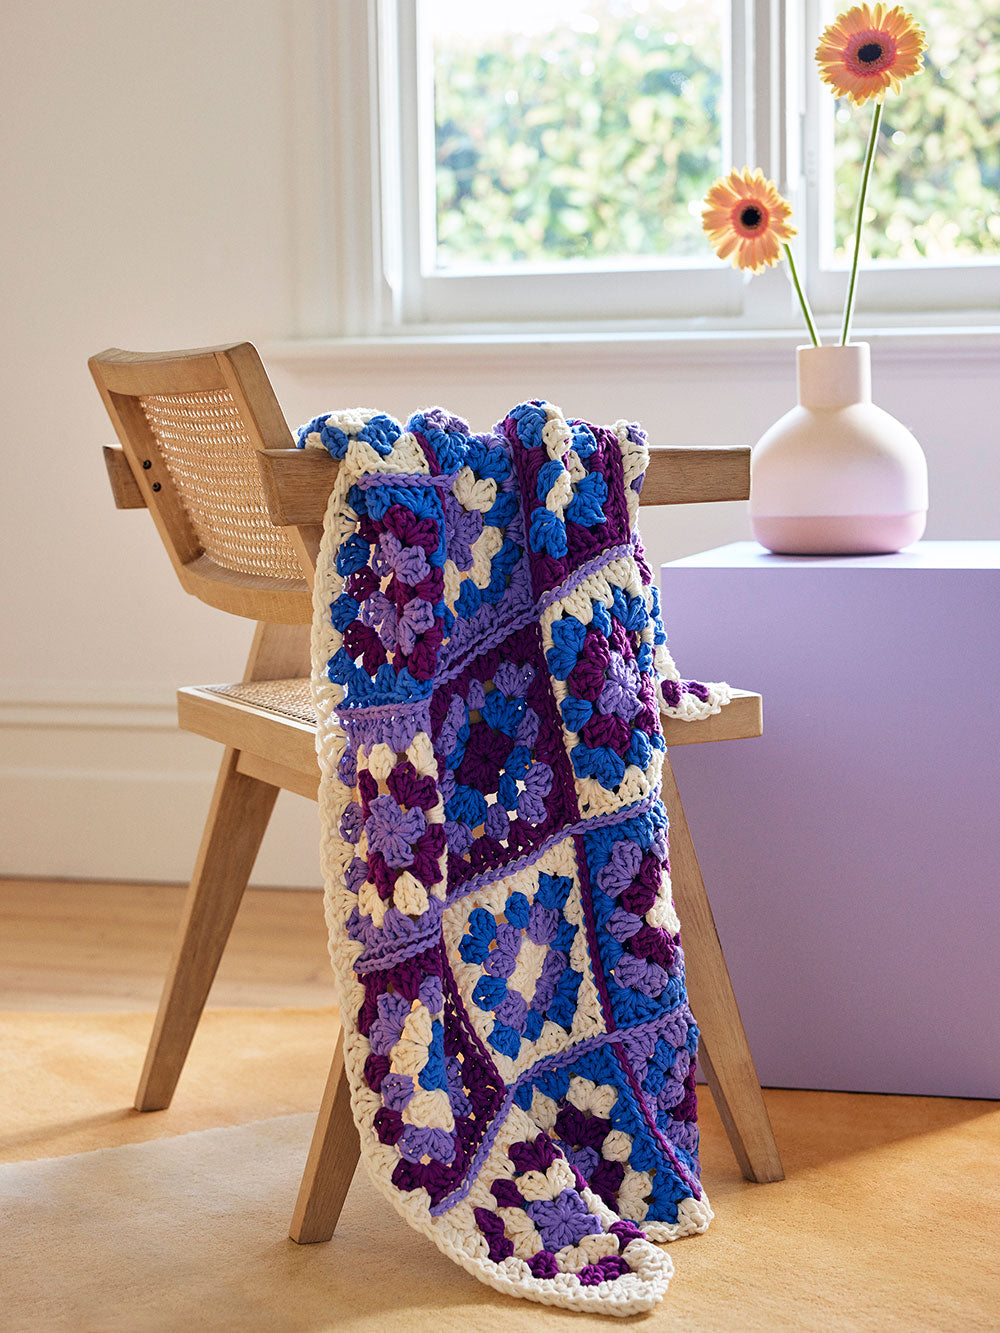 Image of a multi-colour granny square baby blanket draped over the side of a rattan chair,